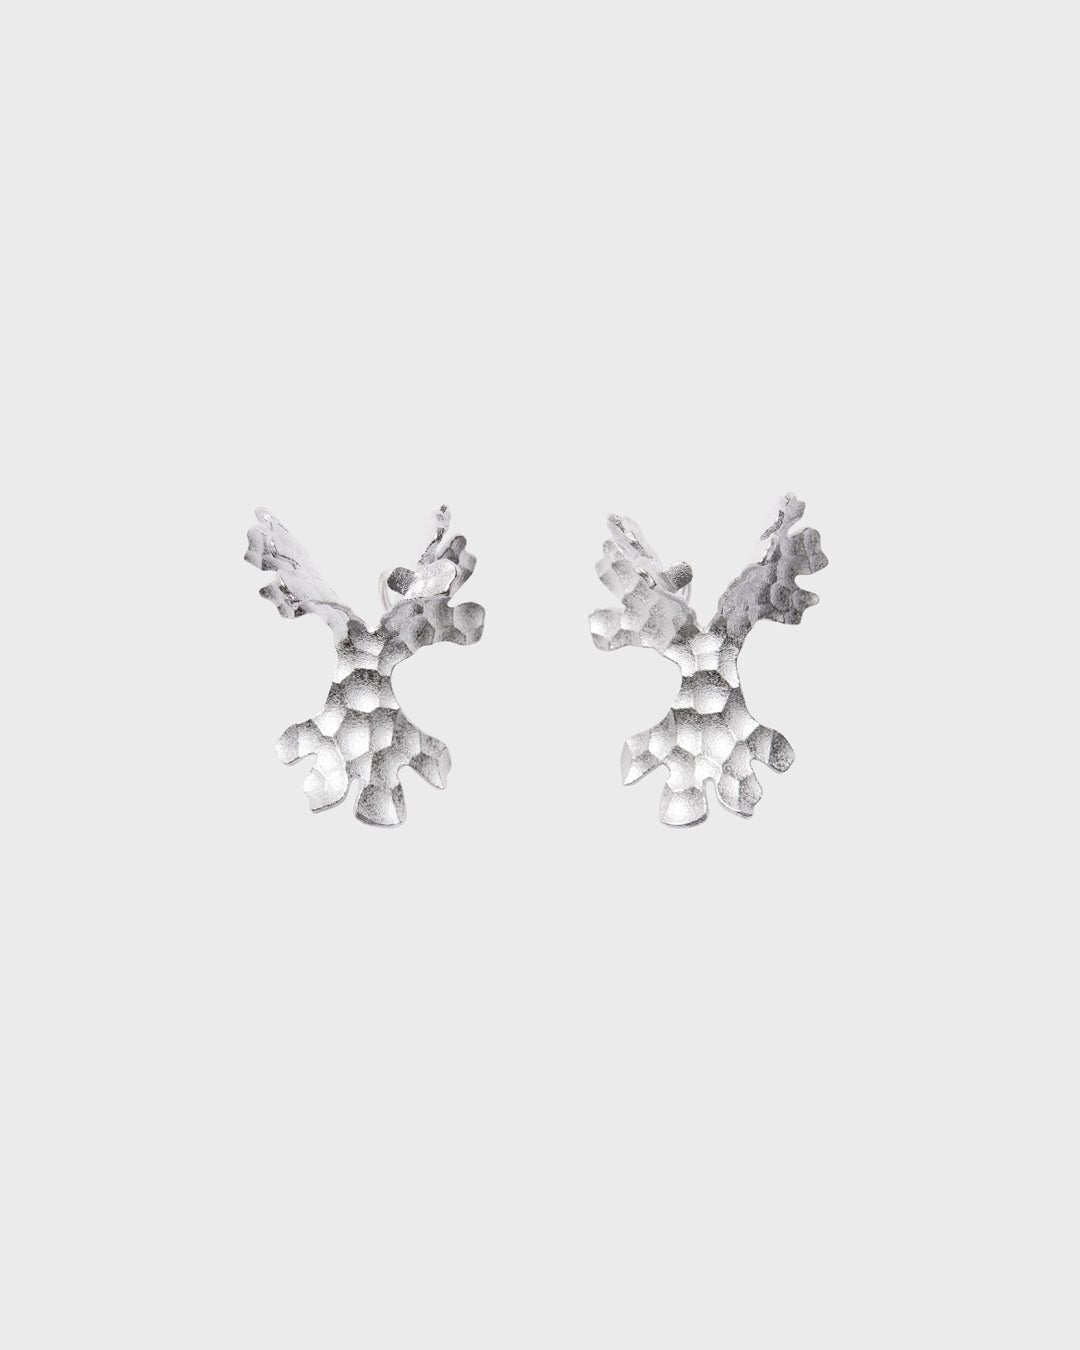 Tundra Earrings Extension Piece Silver